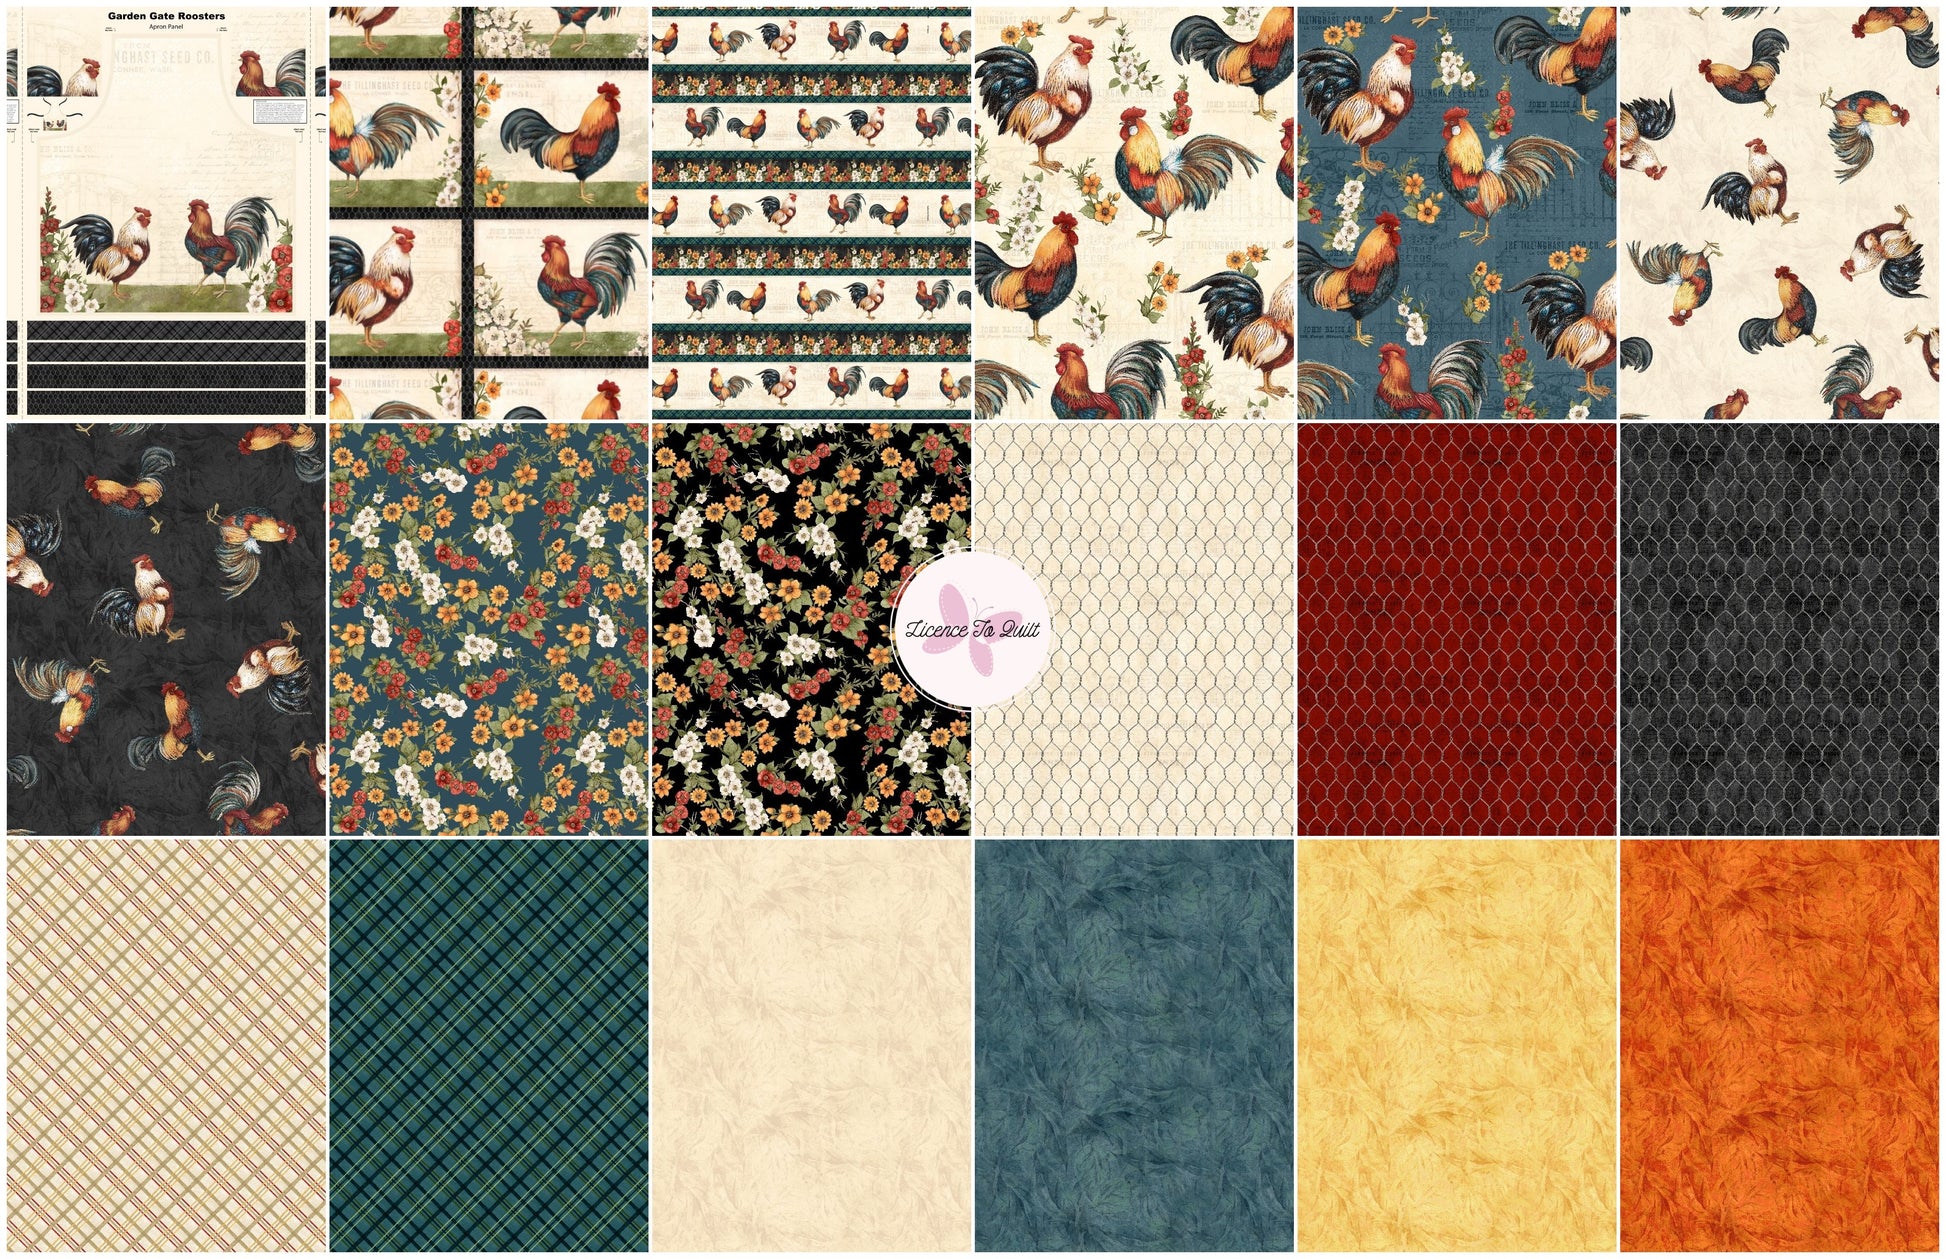 Garden Gate Roosters - Diagonal Plaid Cream - Licence To Quilt